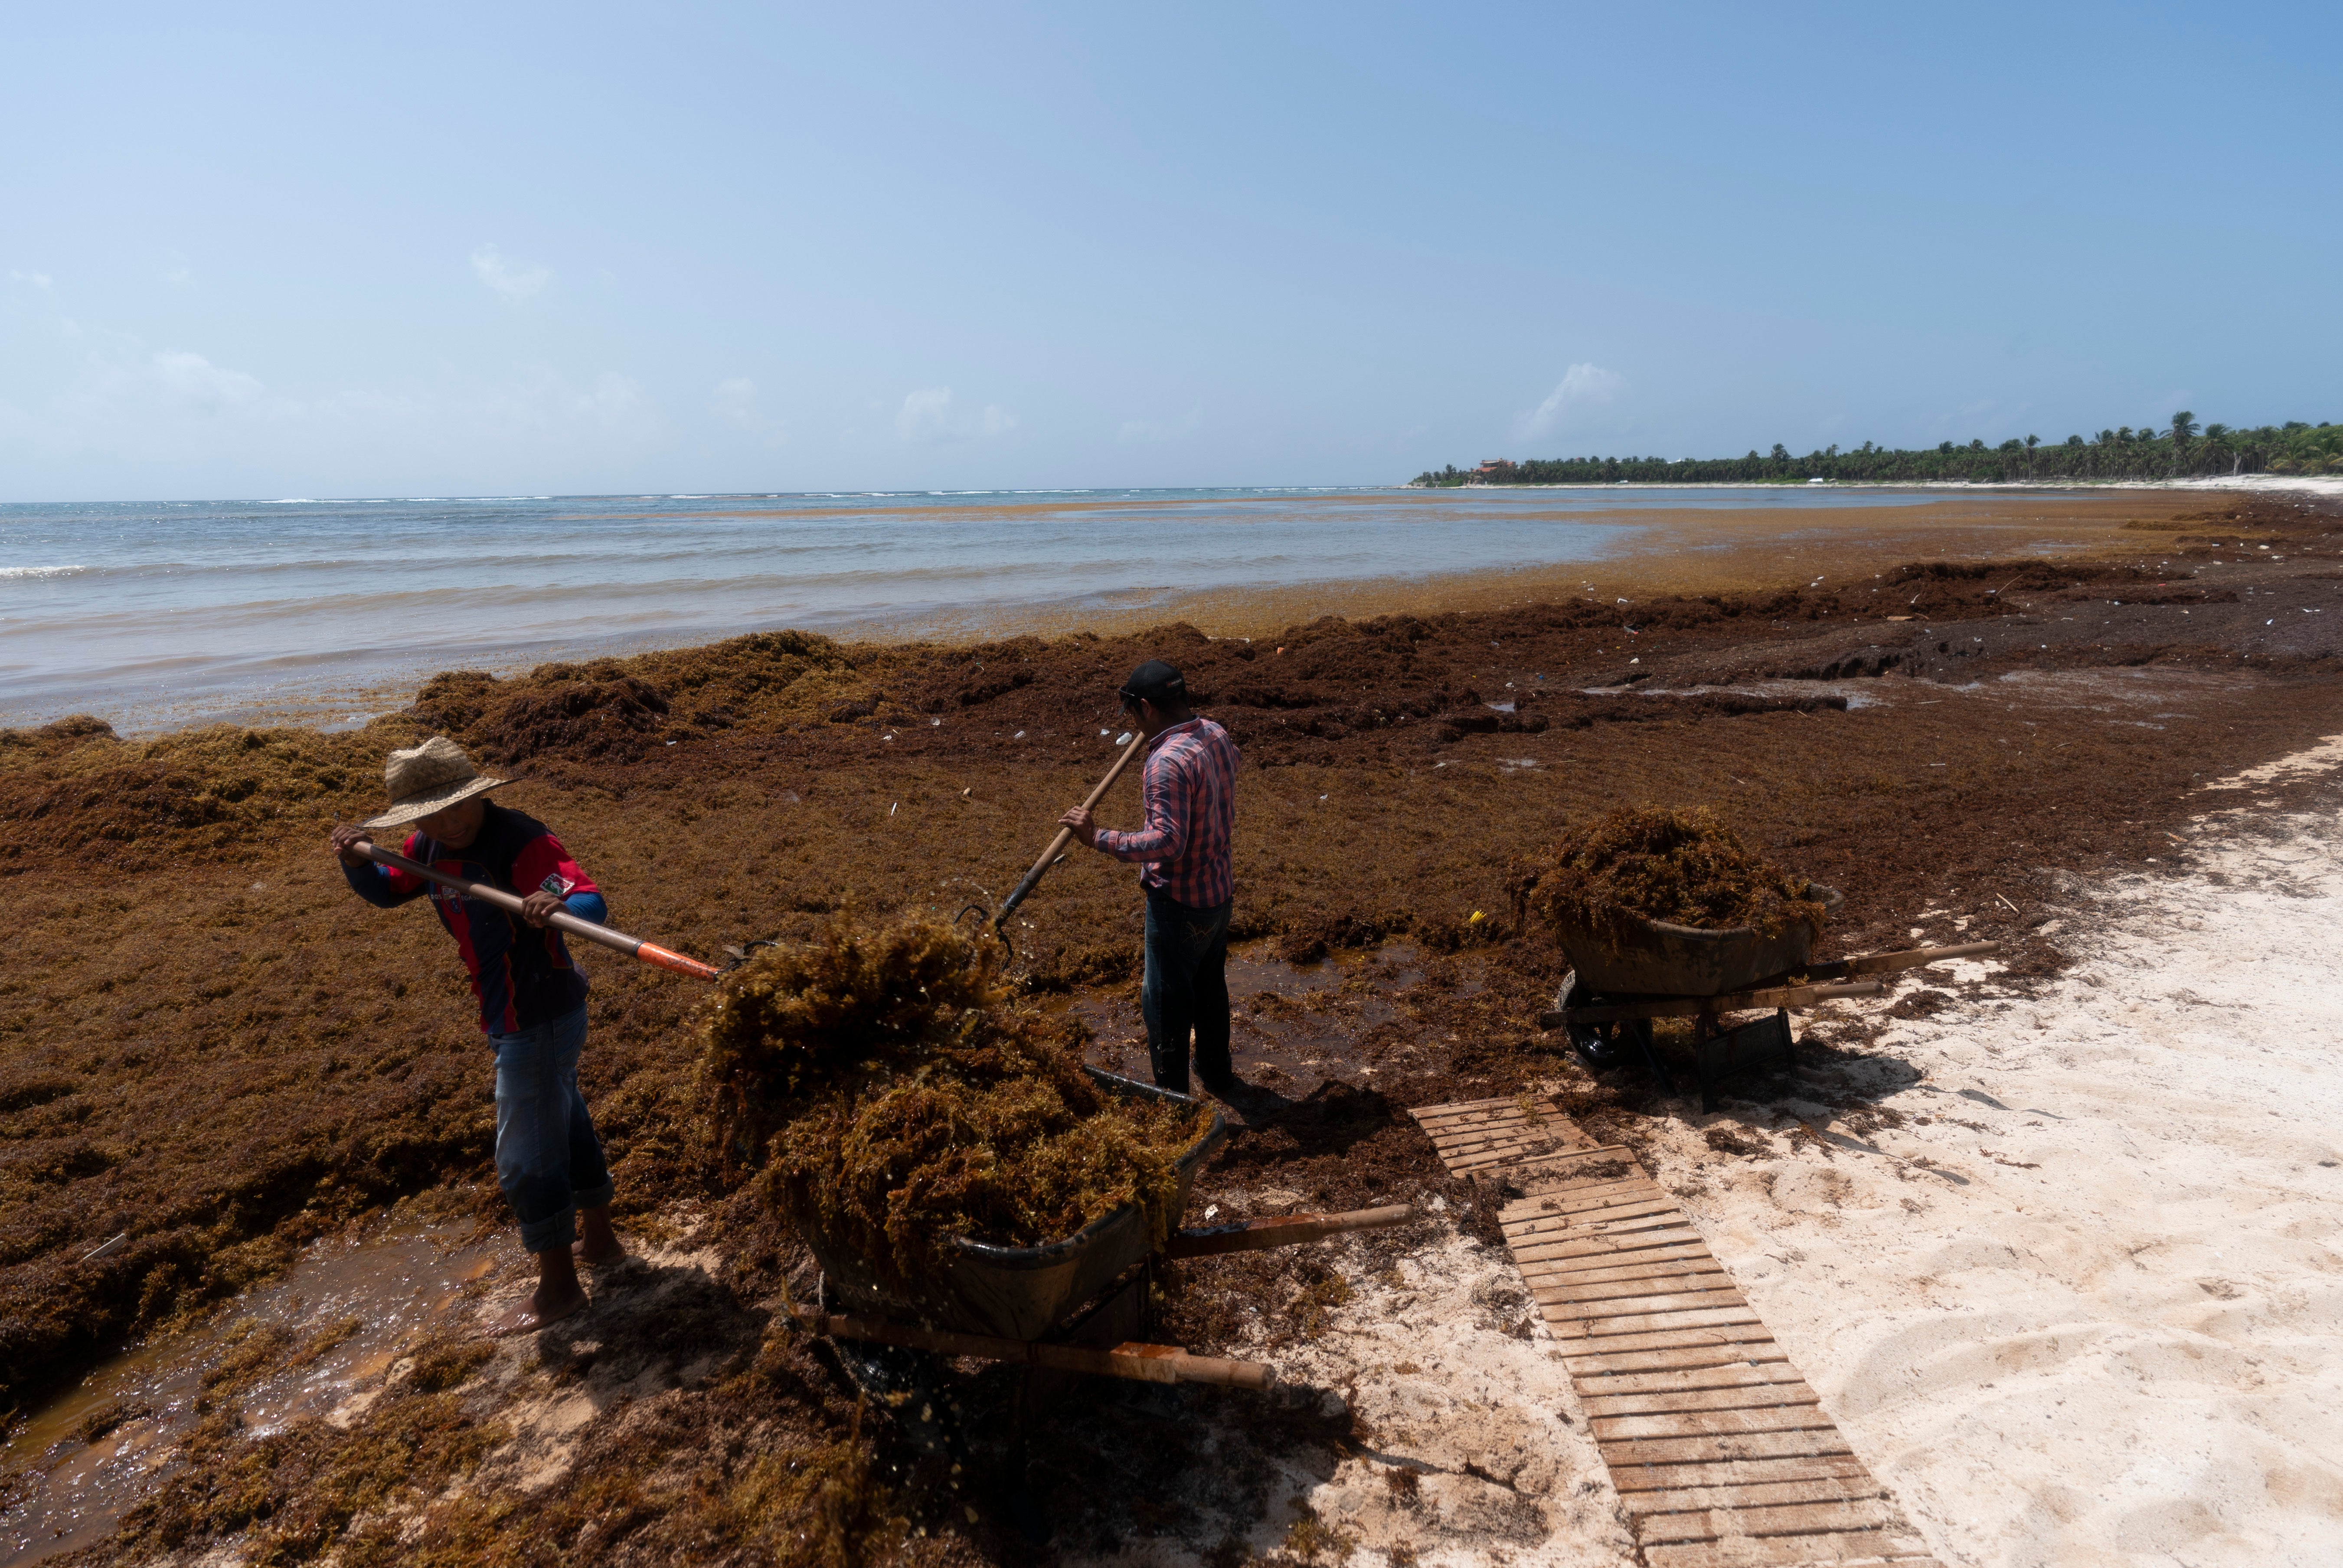 Workers hired by Mexico residents remove sargassum seaweed from the Bay of Soliman, north of Tulum